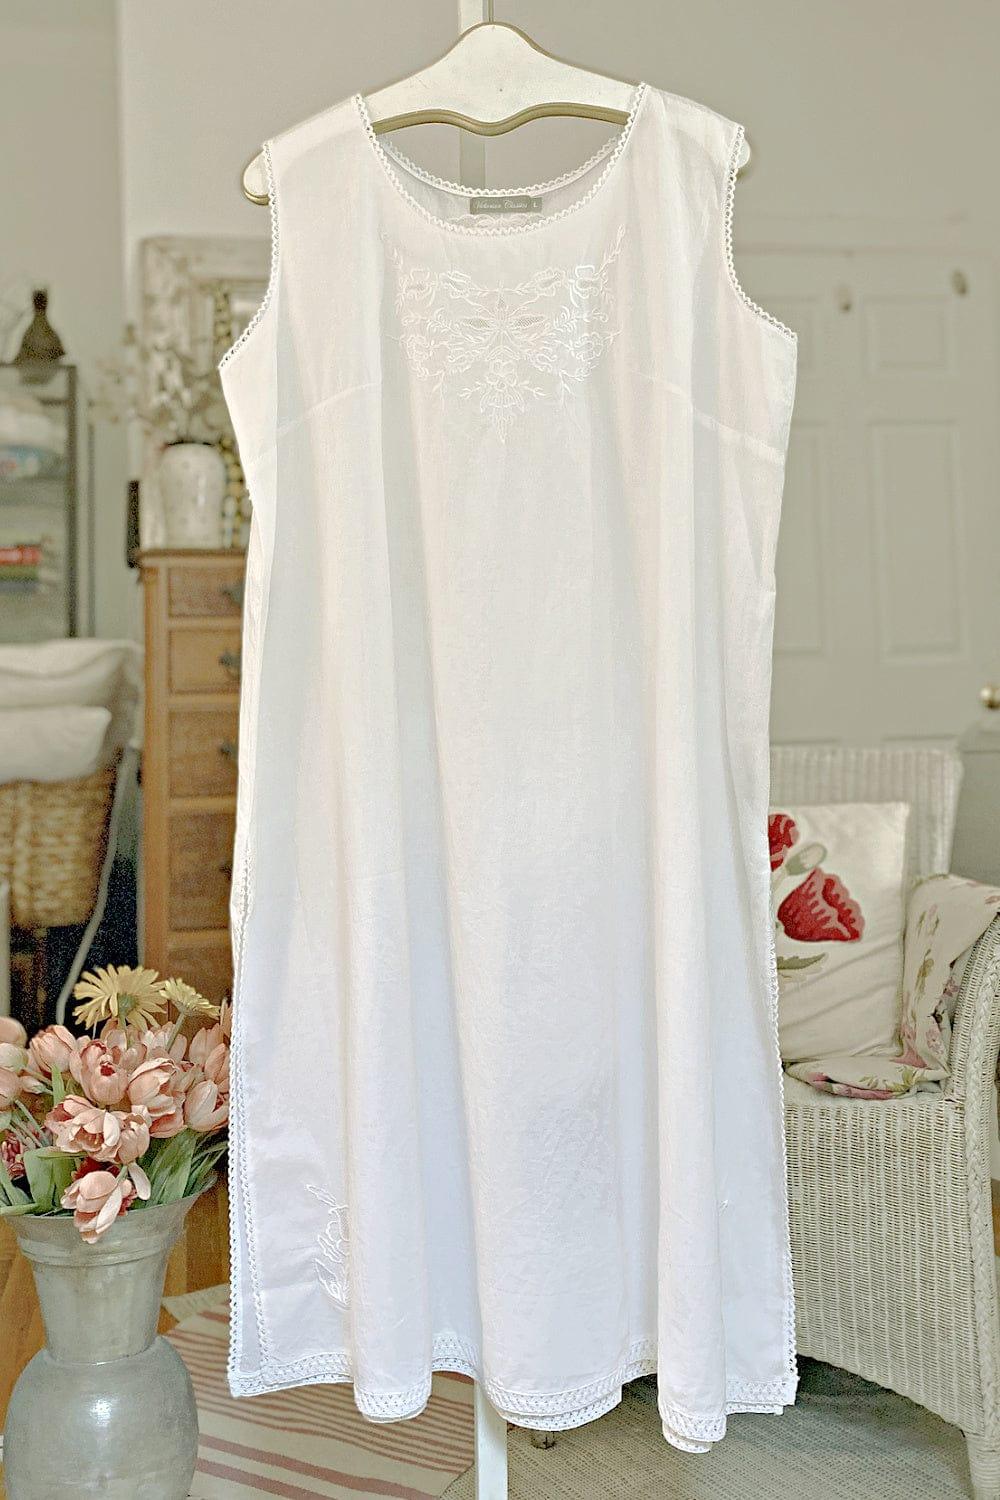 Cotton Sleeveless Mid Calf length white nightgown with decorative front and a round neckline.